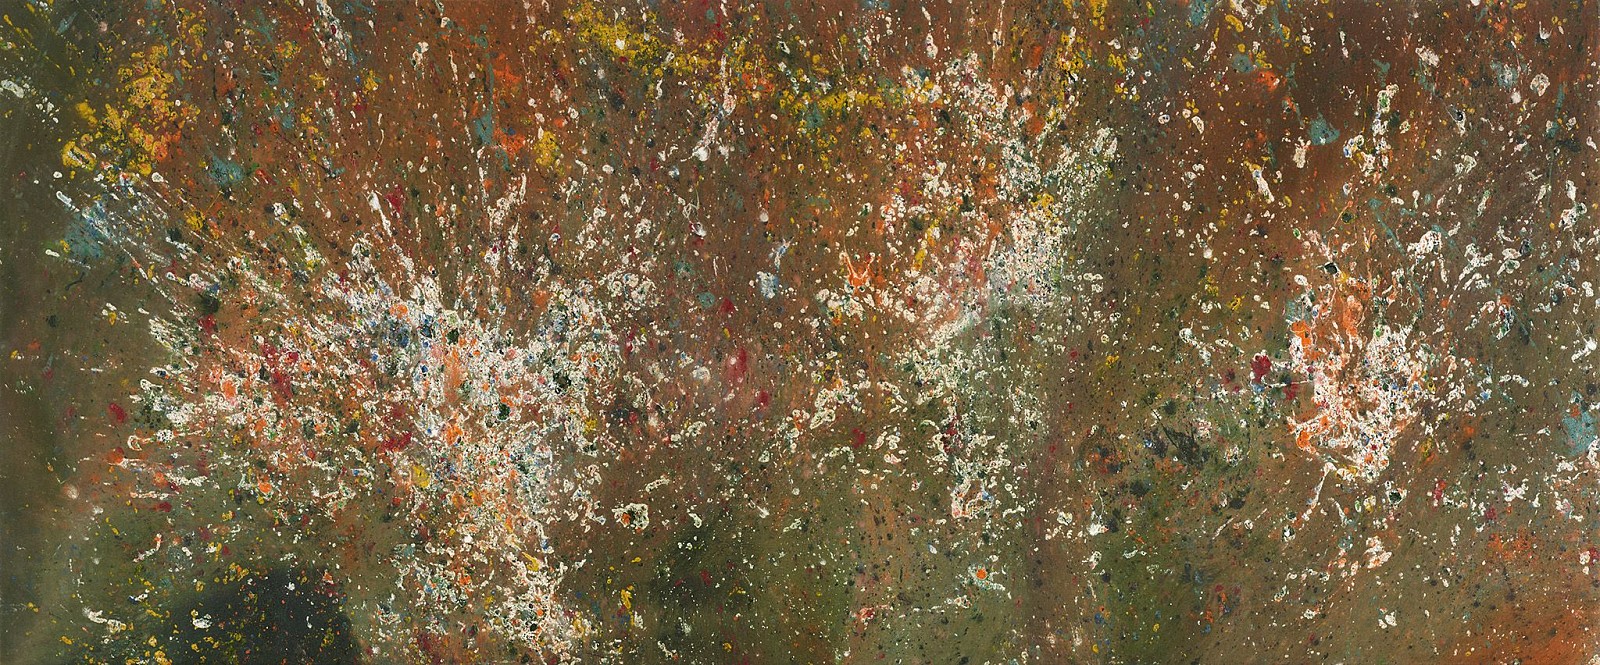 Frederick J. Brown, Inside the Galaxie, 1971
Acrylic on canvas, 43 1/2 x 104 1/2 in. (110.5 x 265.4 cm)
BROW-00010